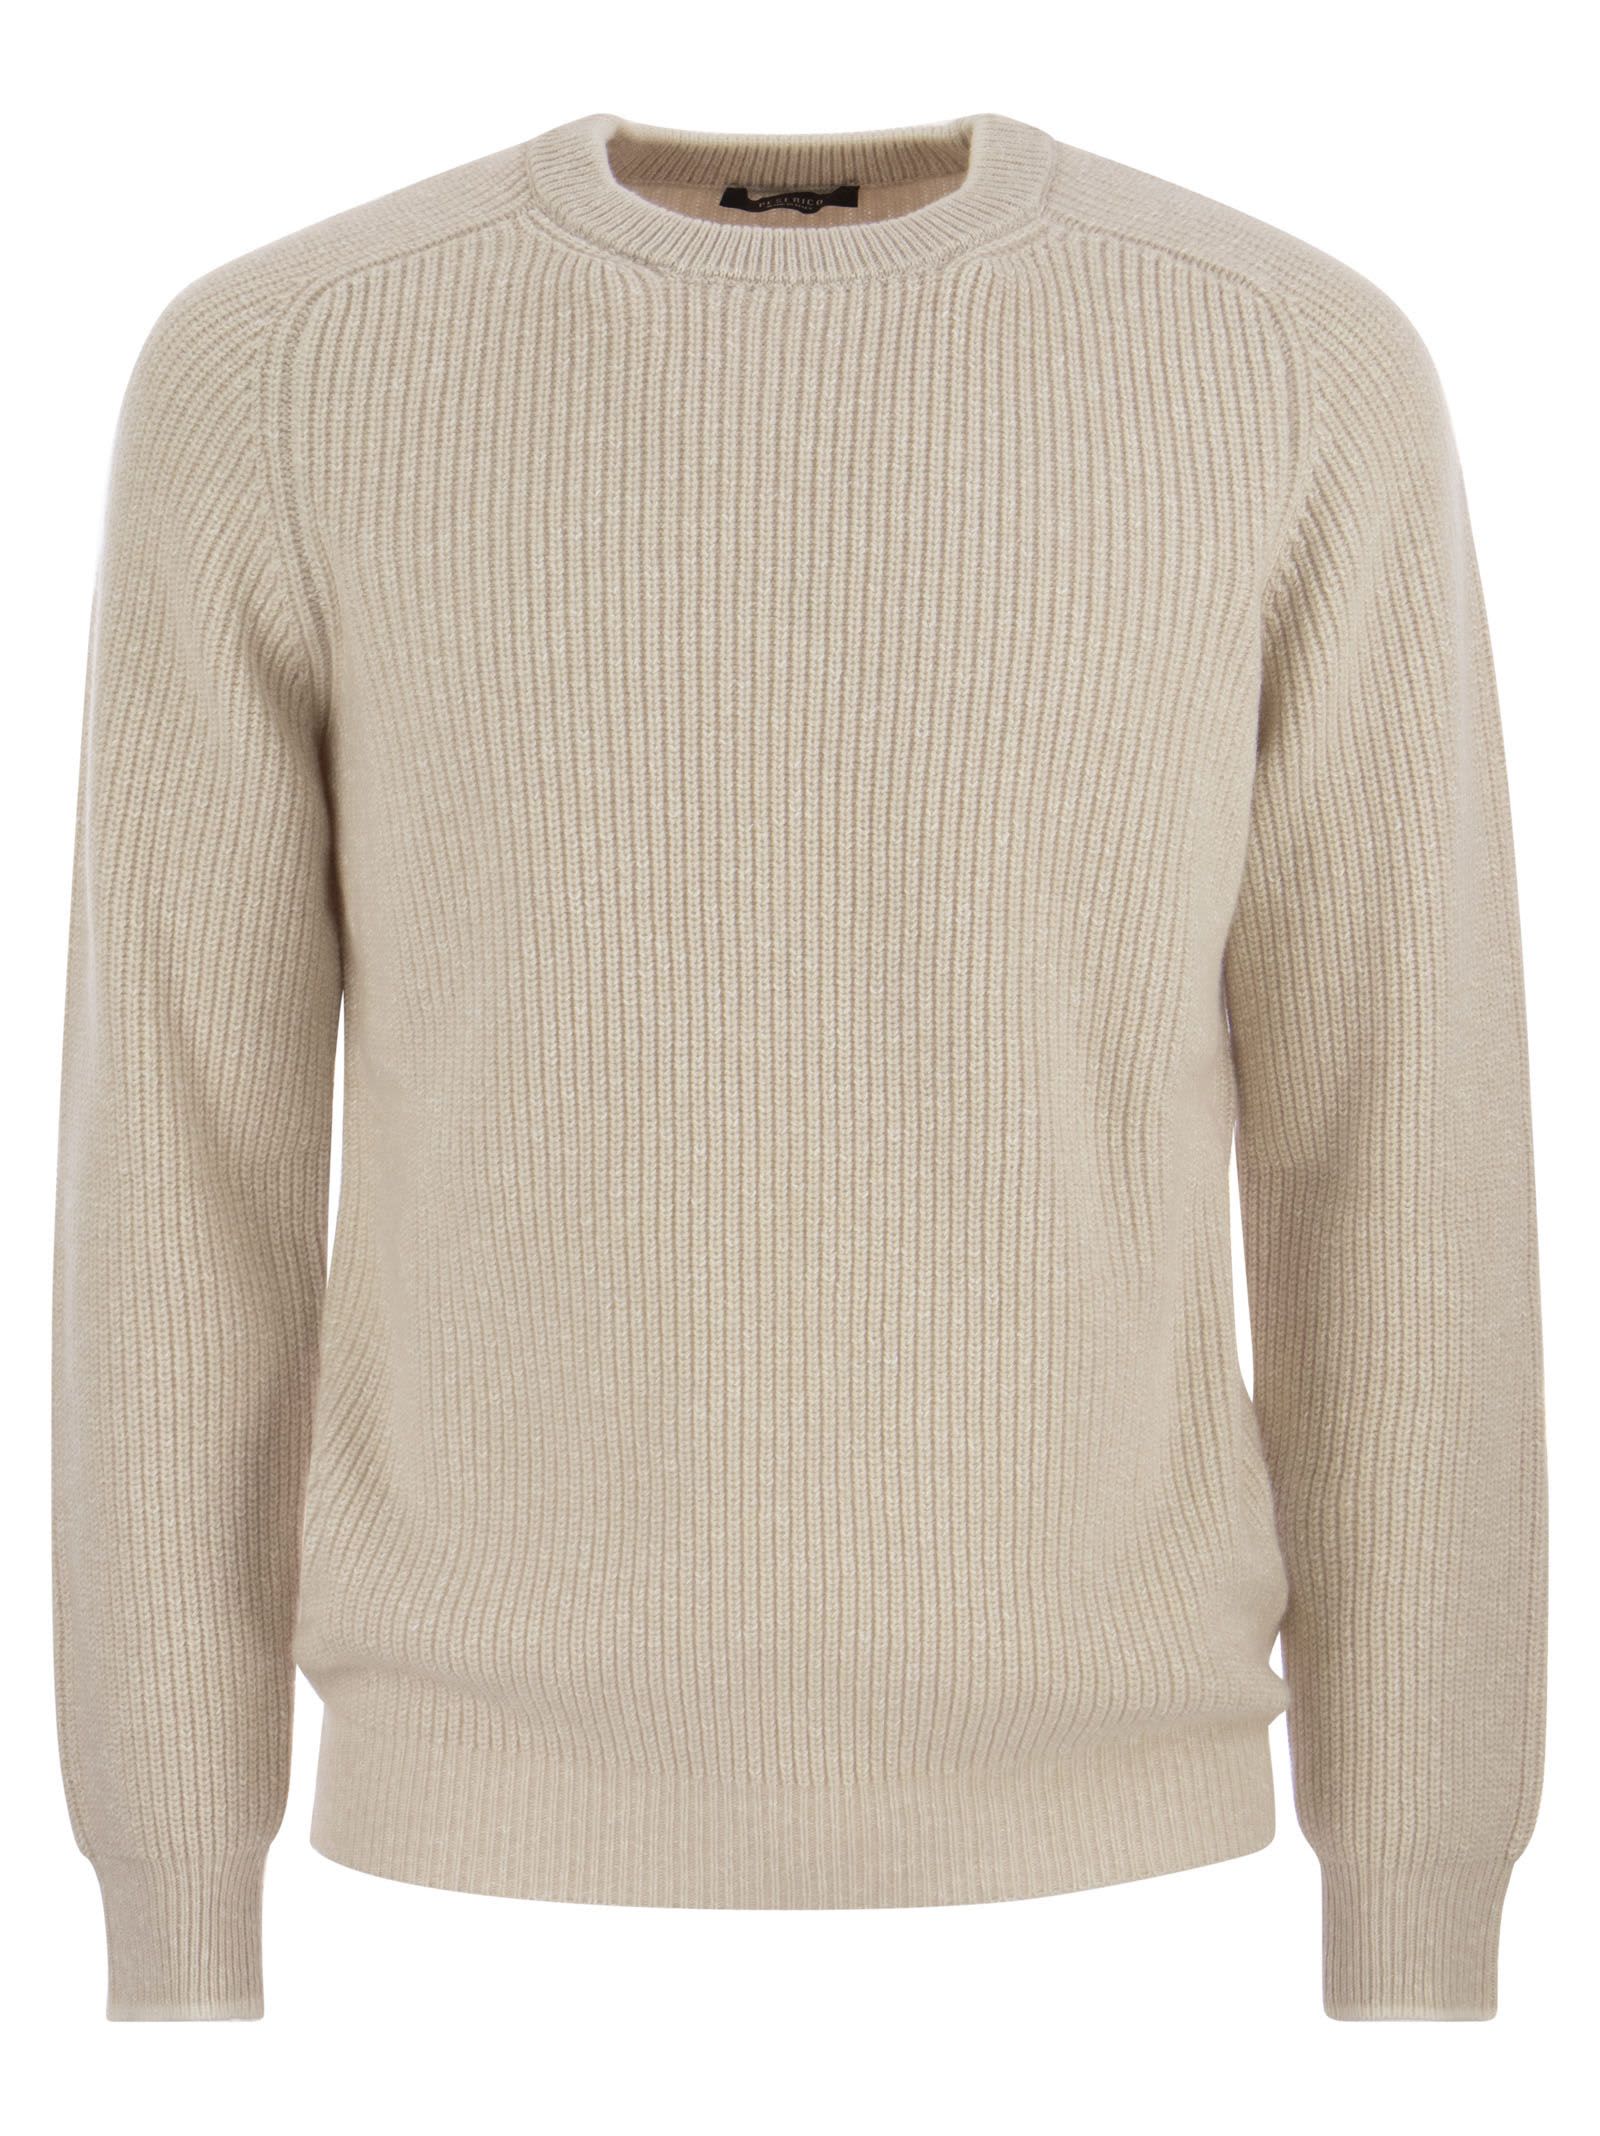 PESERICO CREW-NECK SWEATER IN WOOL AND CASHMERE